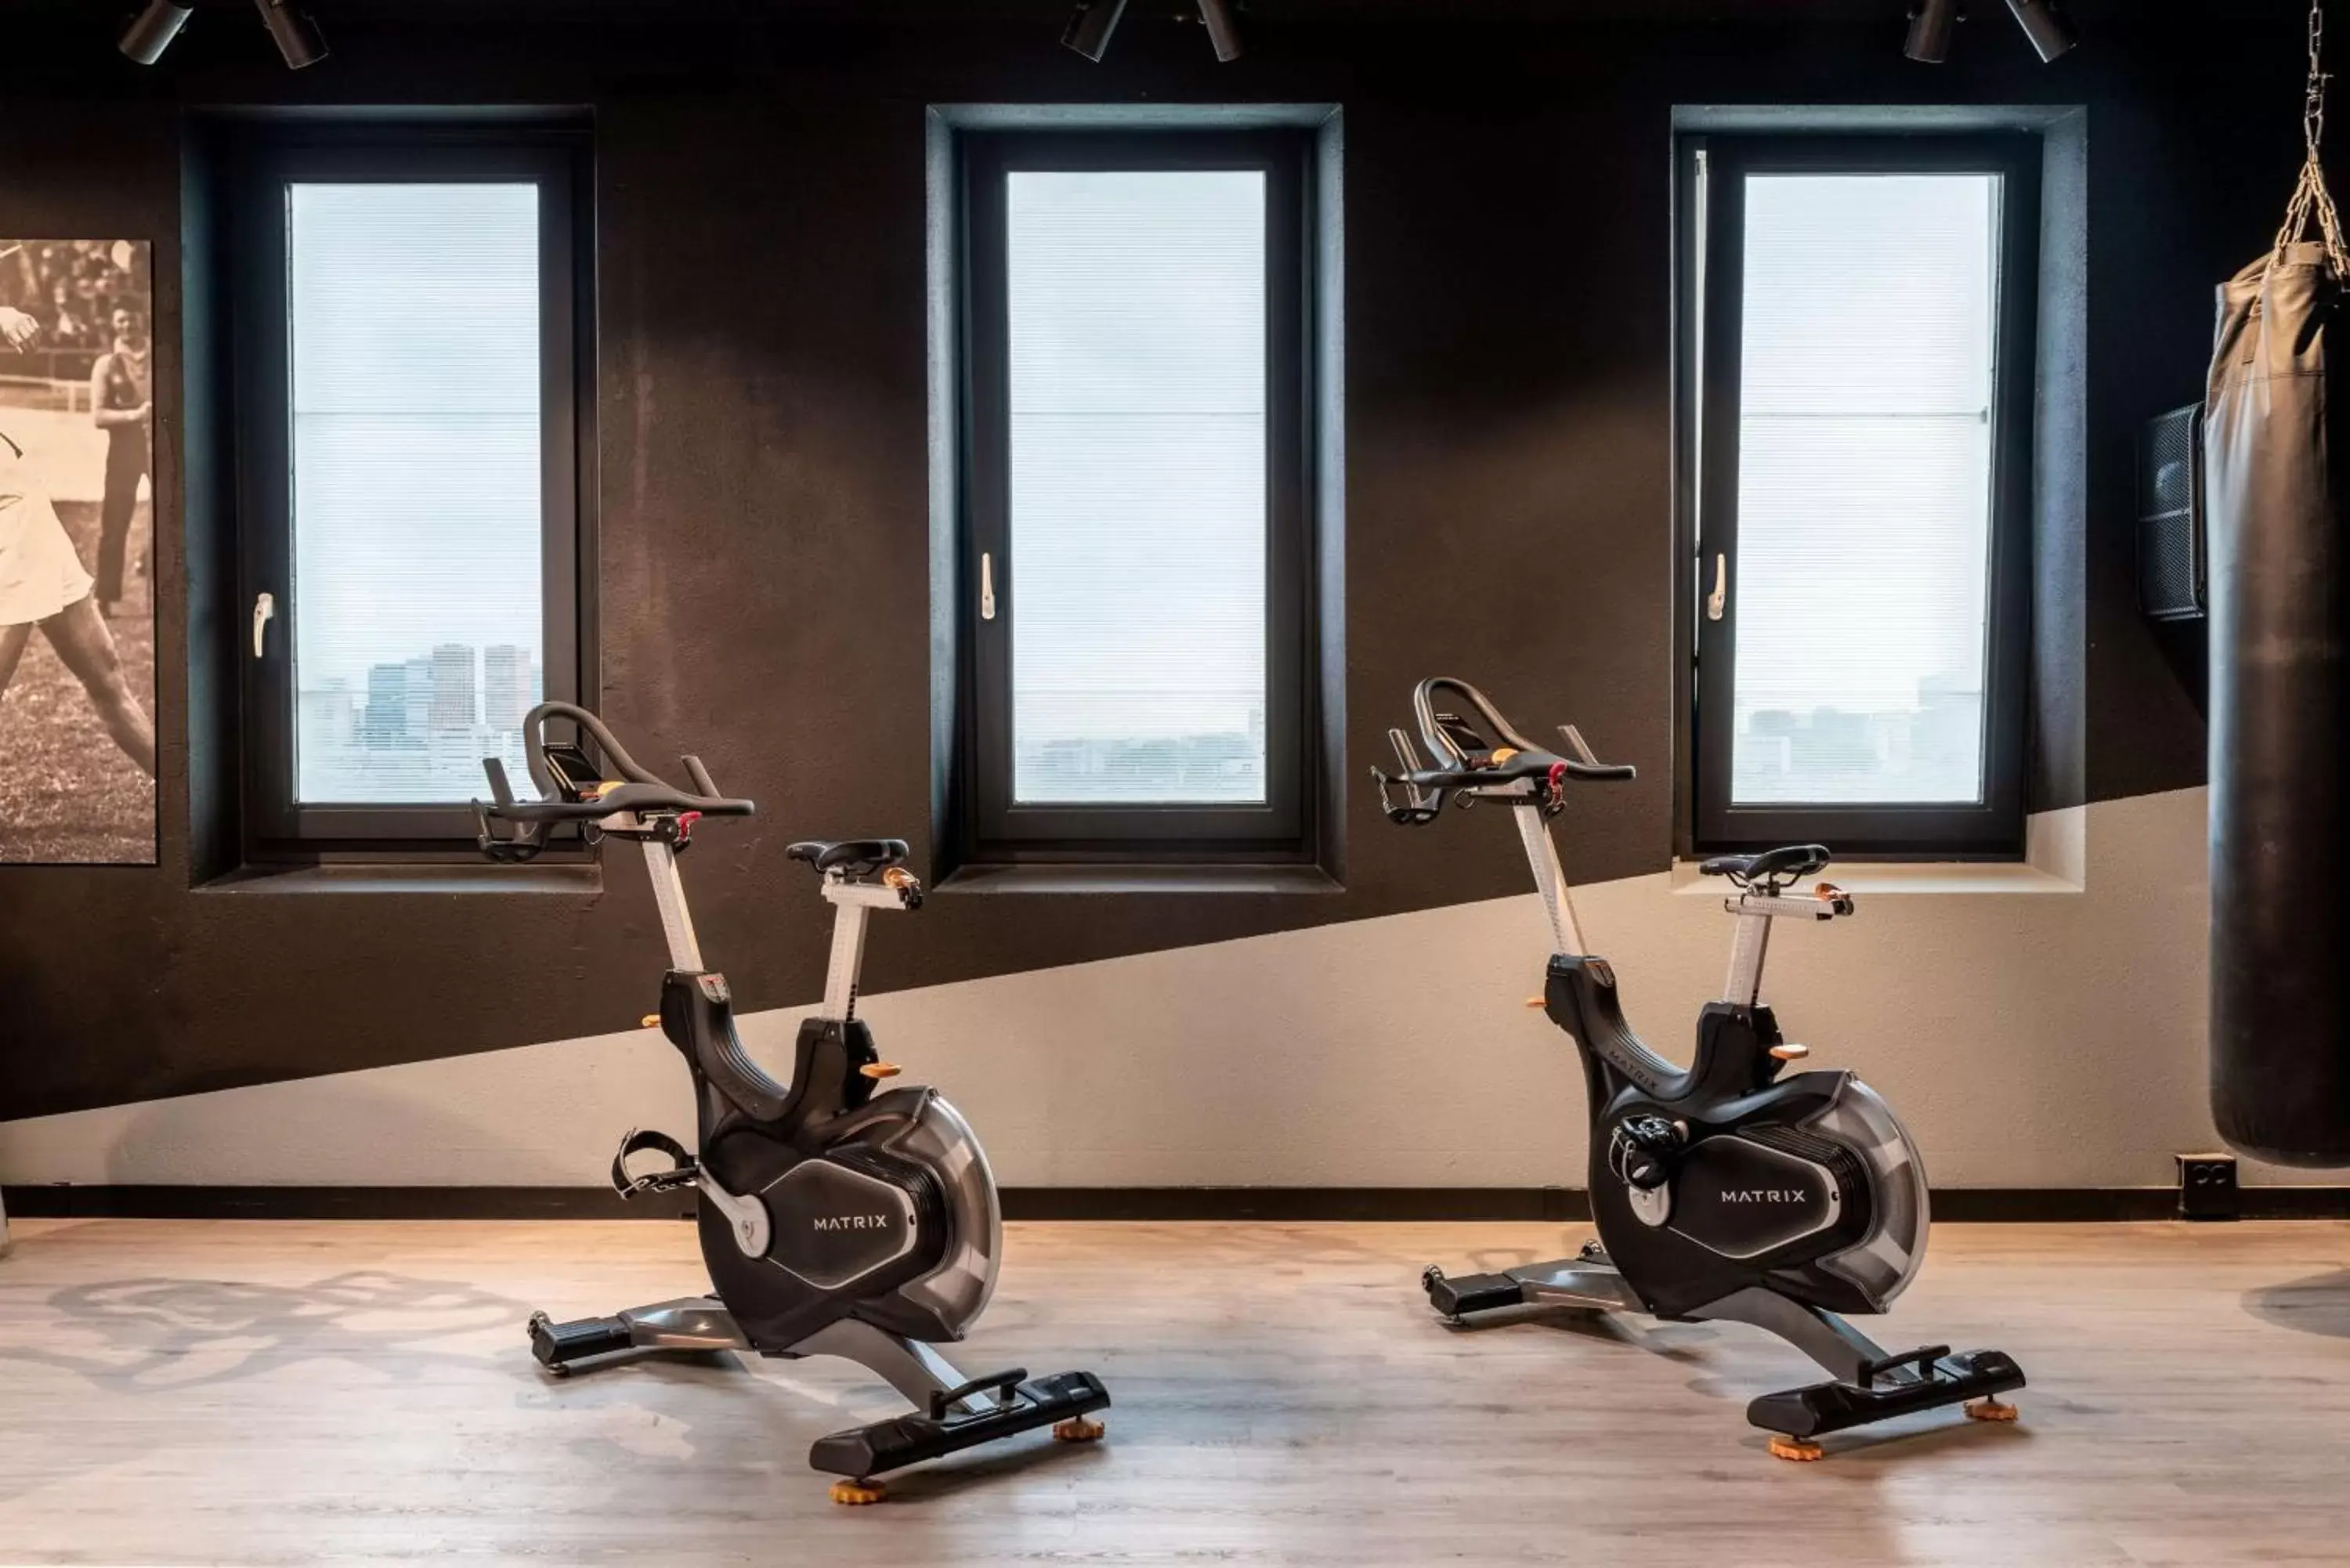 Fitness centre/facilities, Fitness Center/Facilities in Radisson Hotel & Suites Amsterdam South